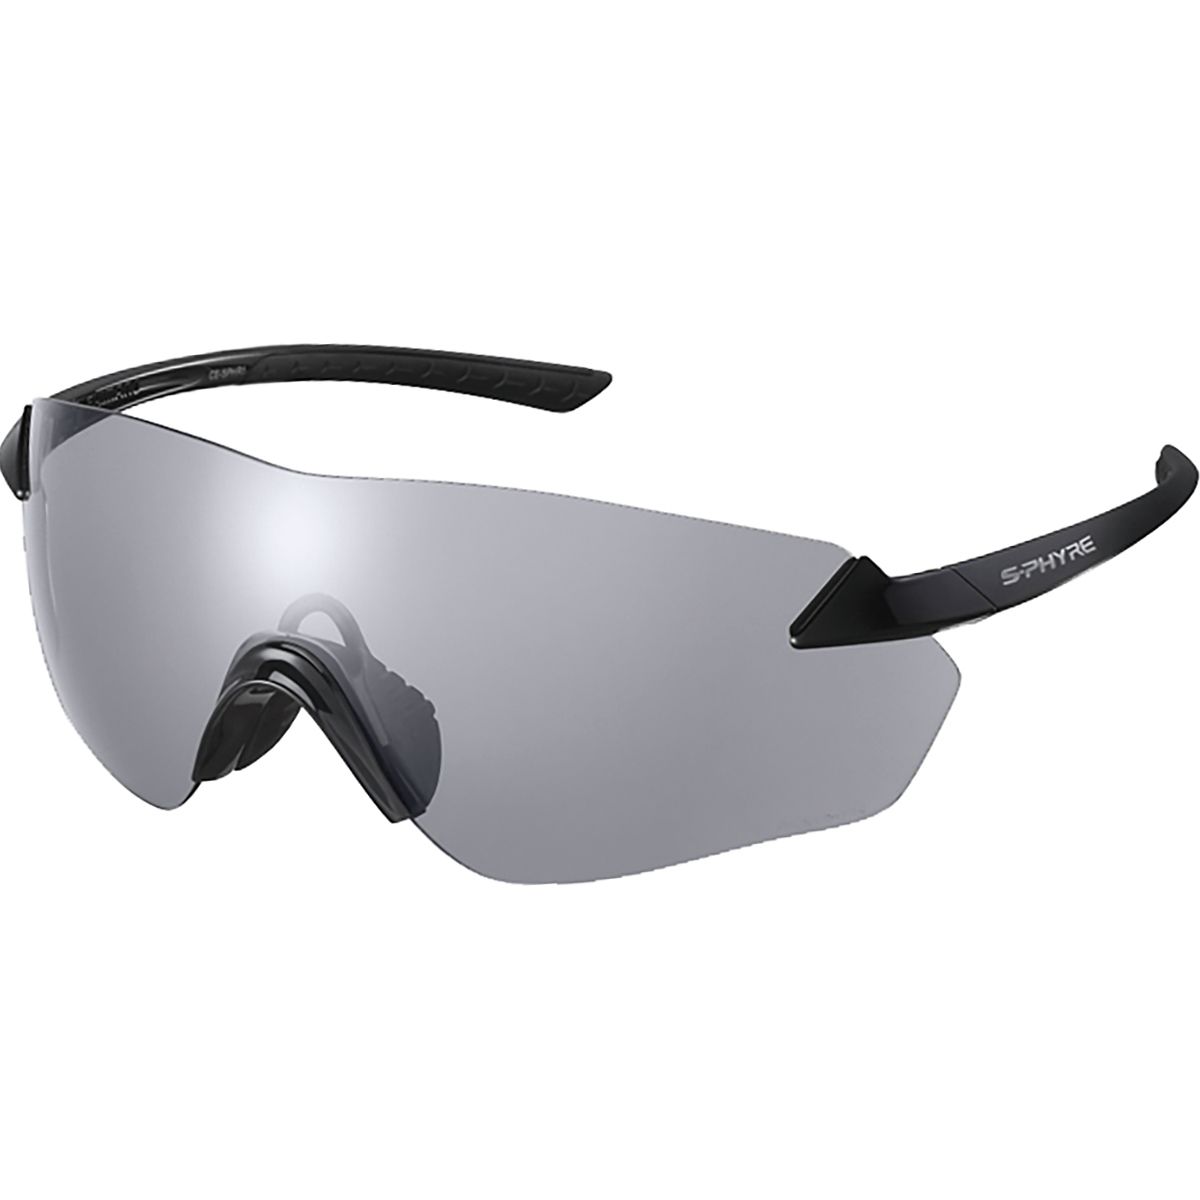 Shimano S-PHYRE R Cycling Sunglasses - CE-SPHR1 - Men's